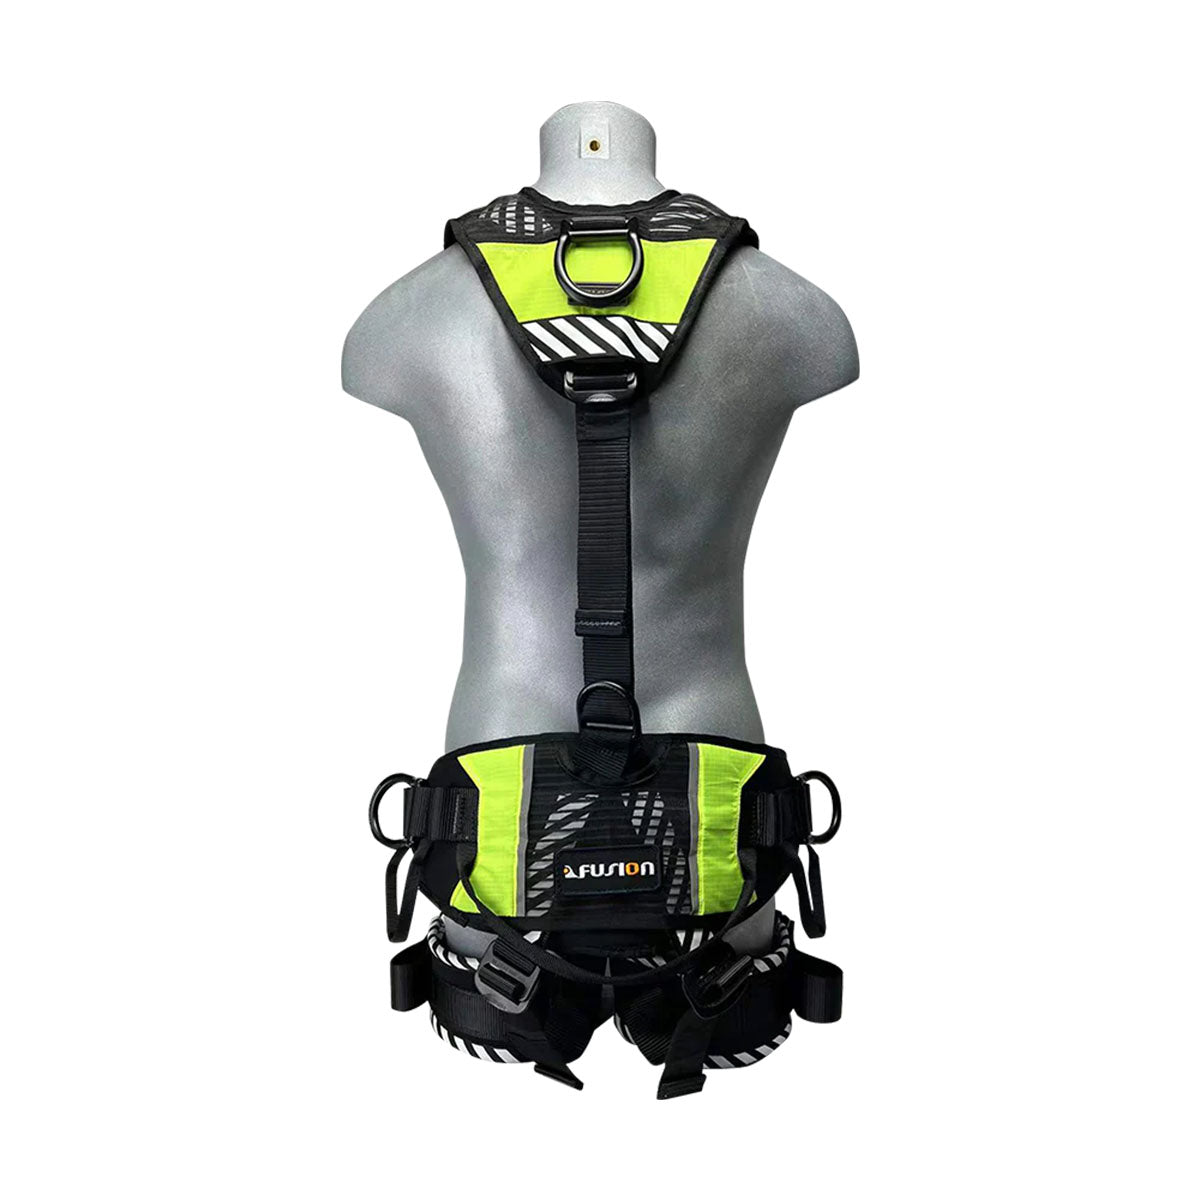 Fusion Enhanced Rope Access Full Body Harness